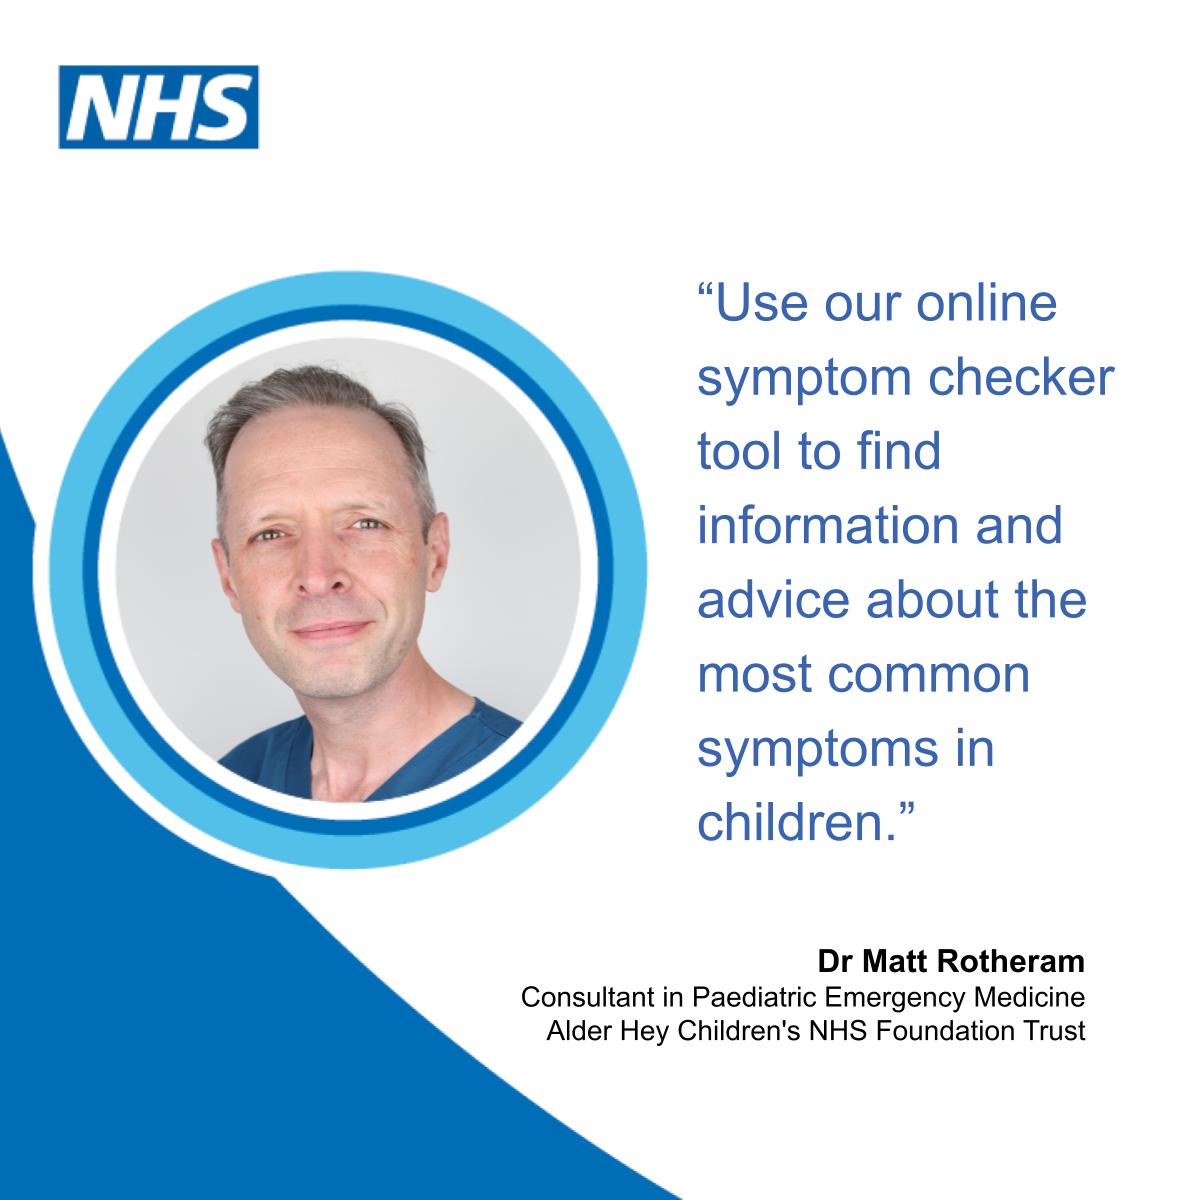 When a child is unwell, it can be worrying. Use Alder Hey Hospital’s online symptom checker tool to find information on the most common symptoms in children alderhey.nhs.uk/conditions/sym…